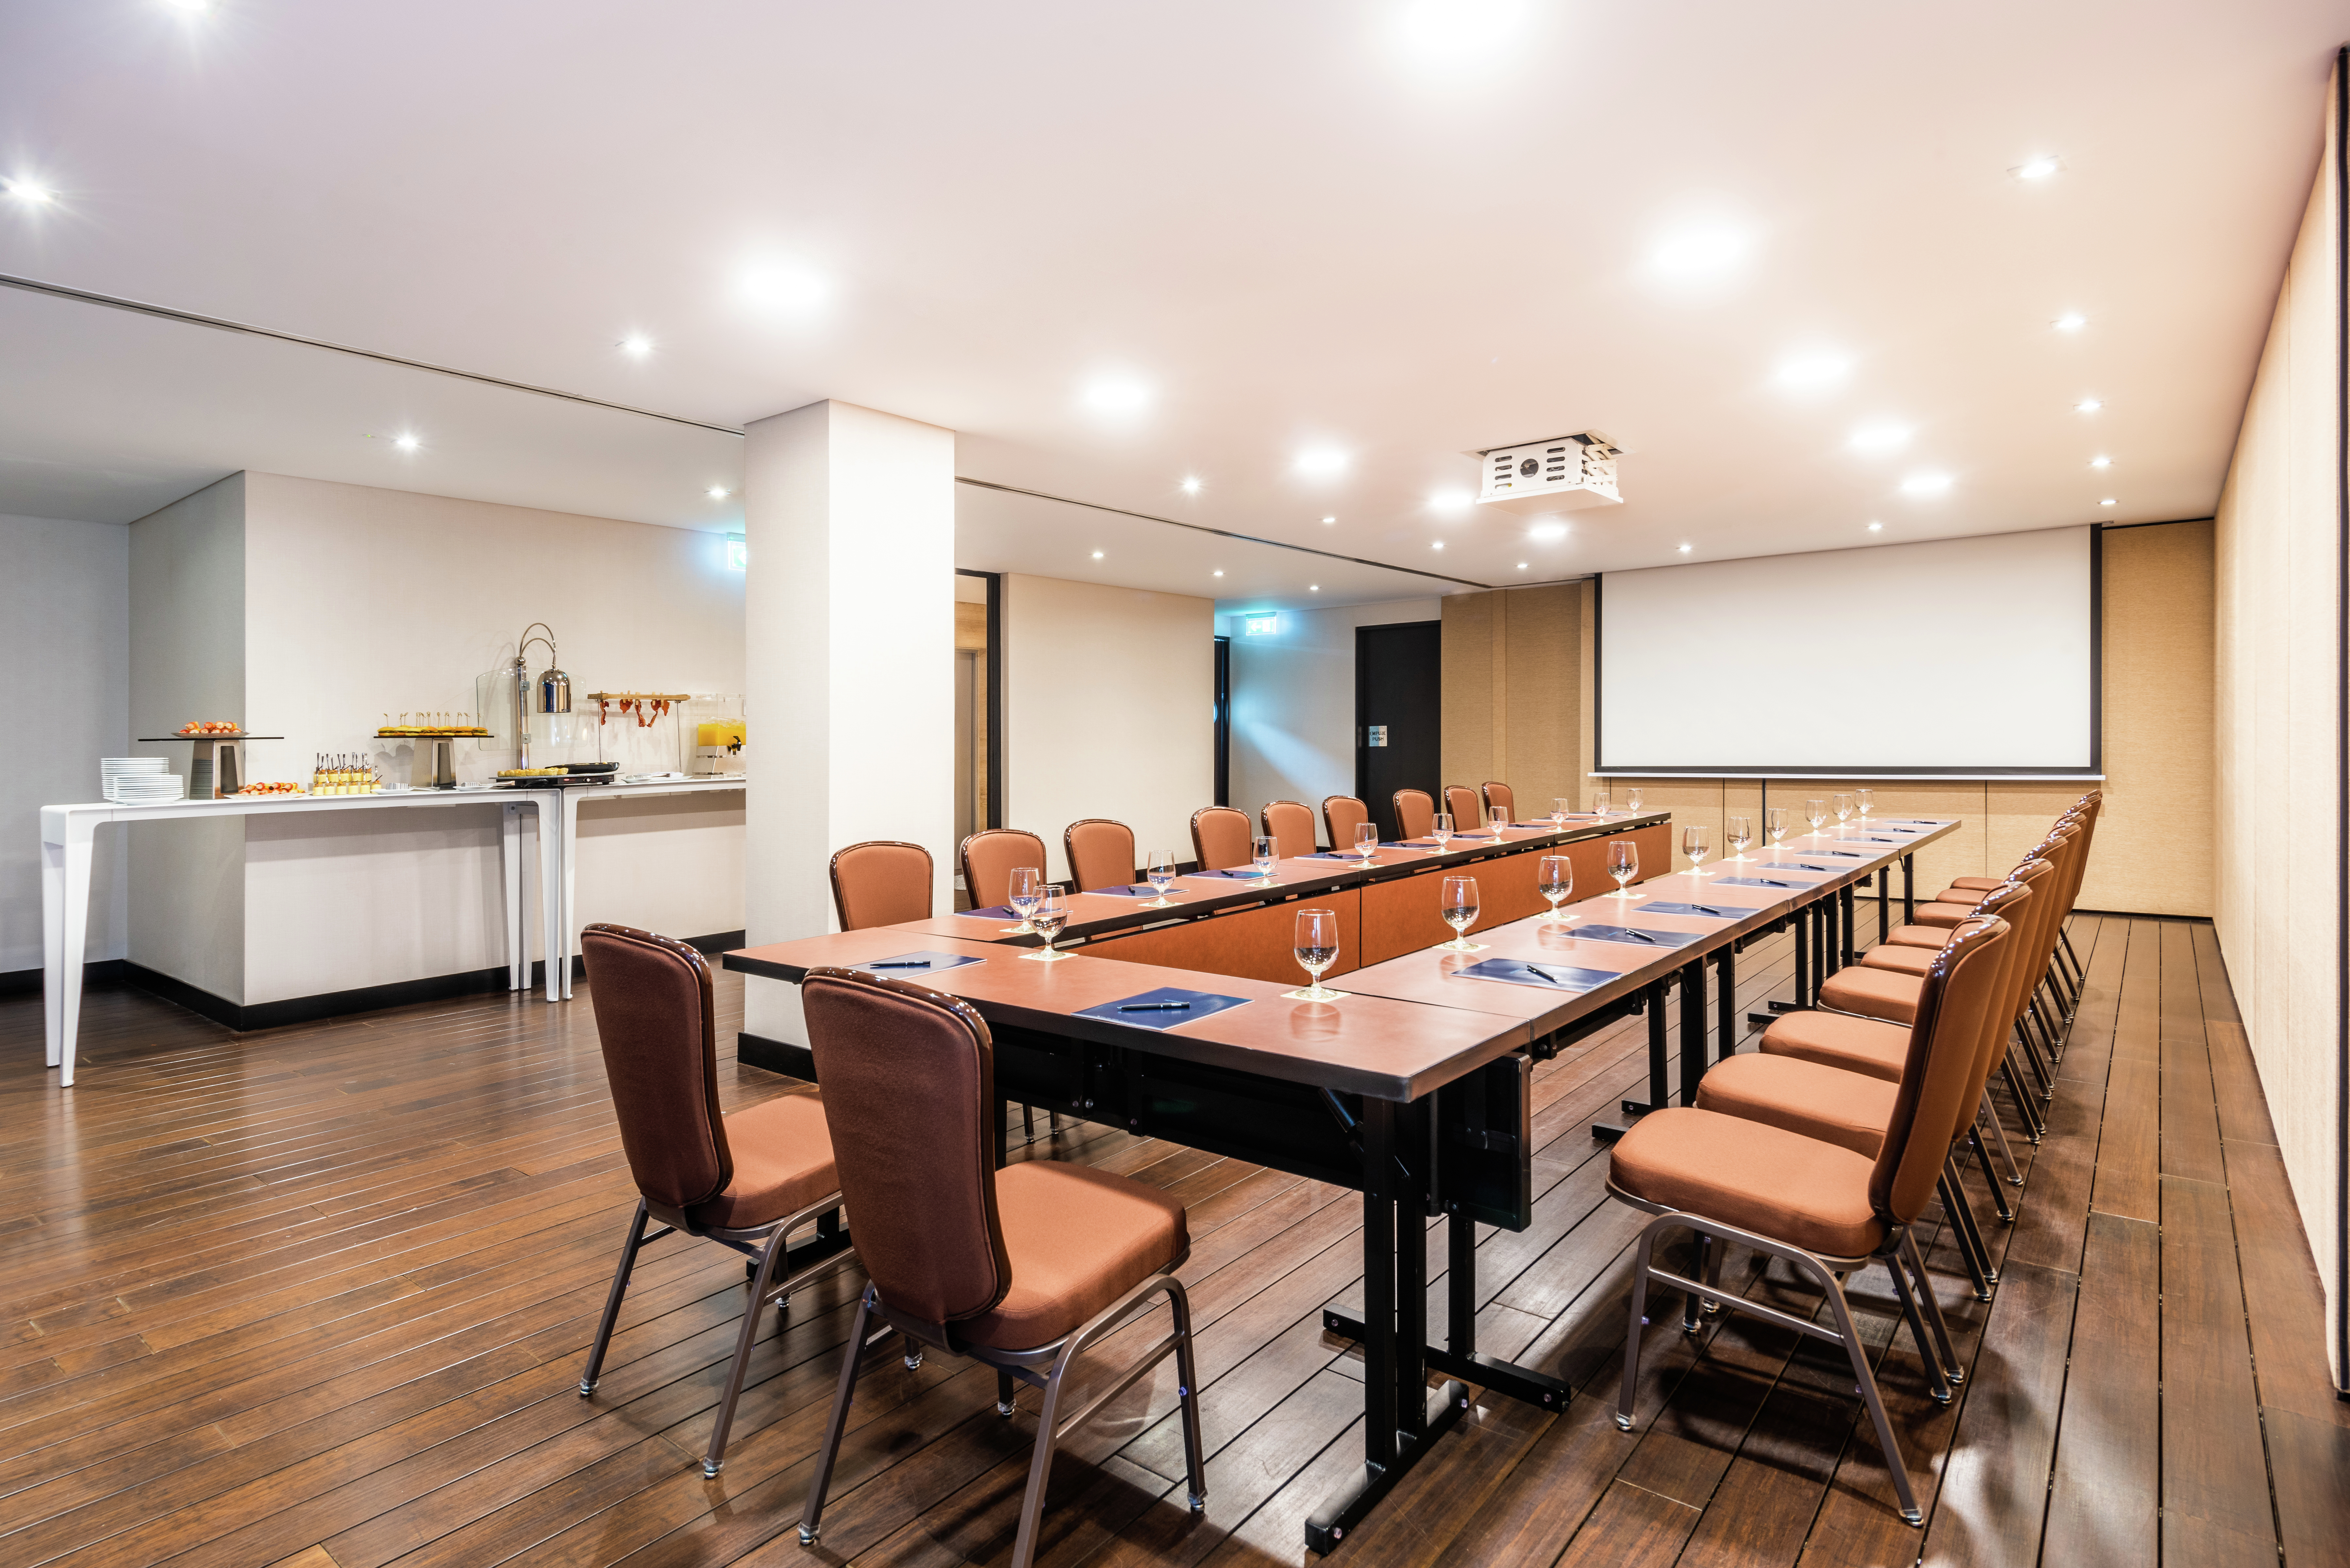 U Set Up Meeting Room with Seating for 20 Guests